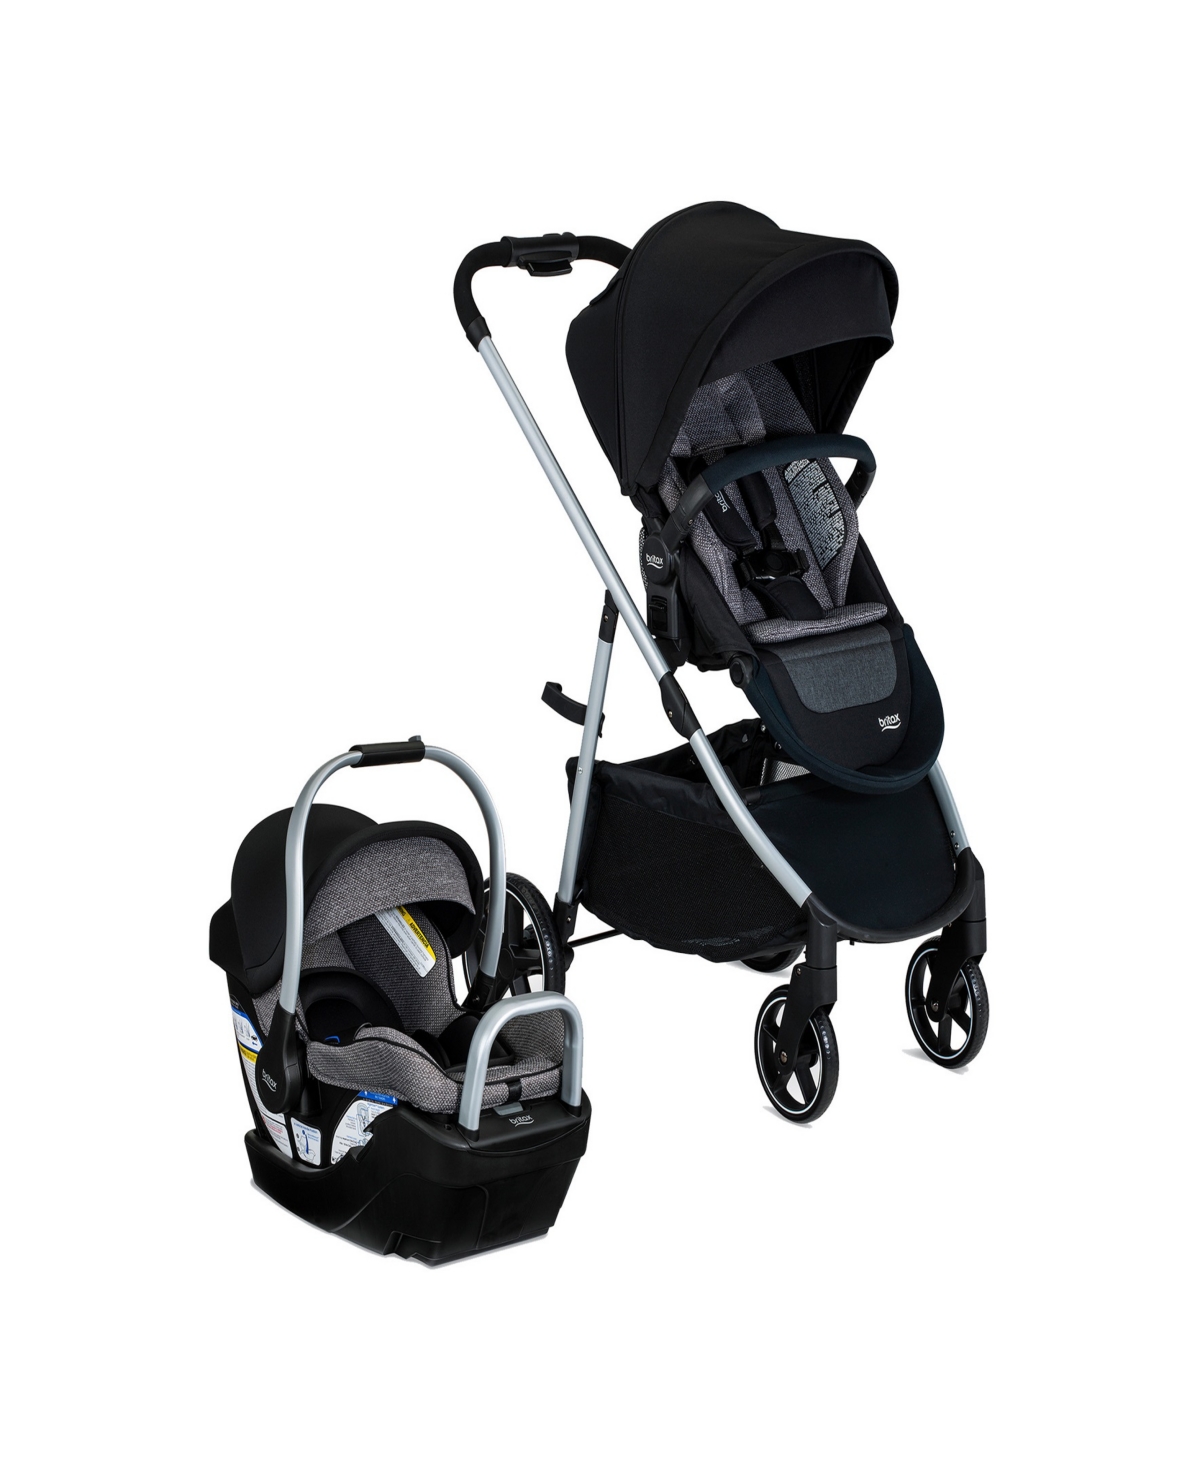 Shop Britax Willow Grove Sc Travel System In Black